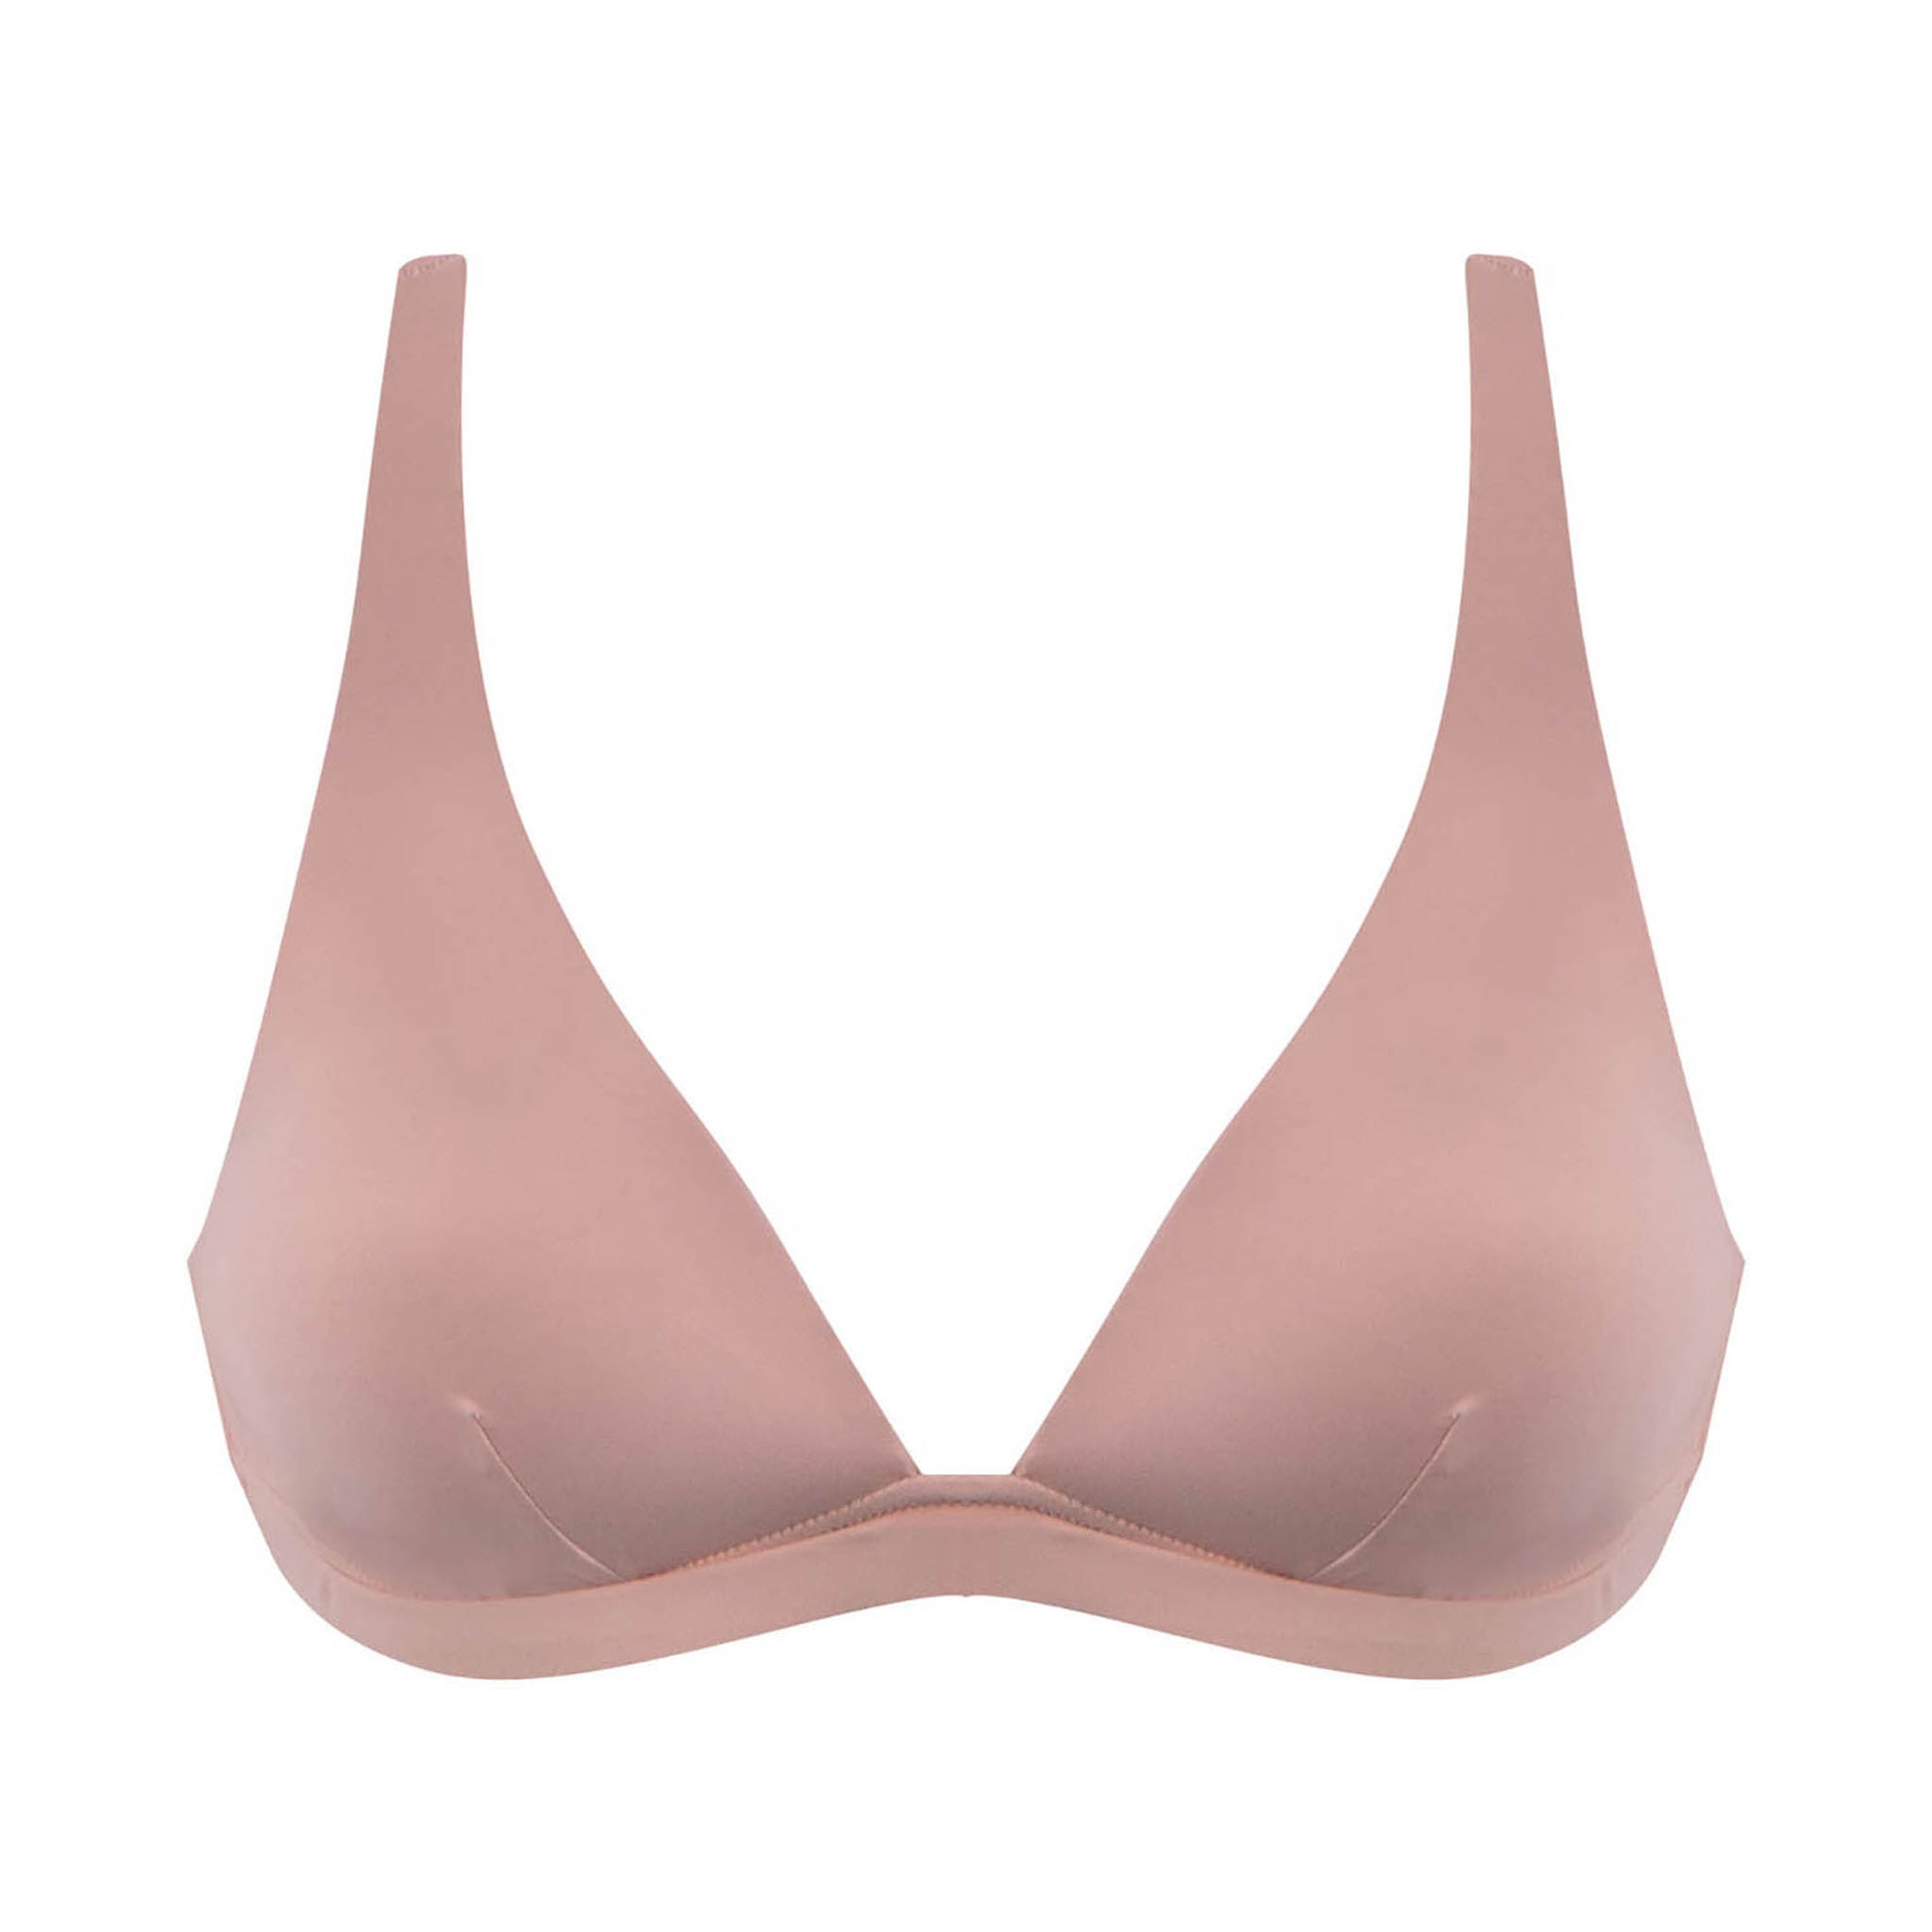 Nokaya essential nude padded triangle bra is utterly free of wires.